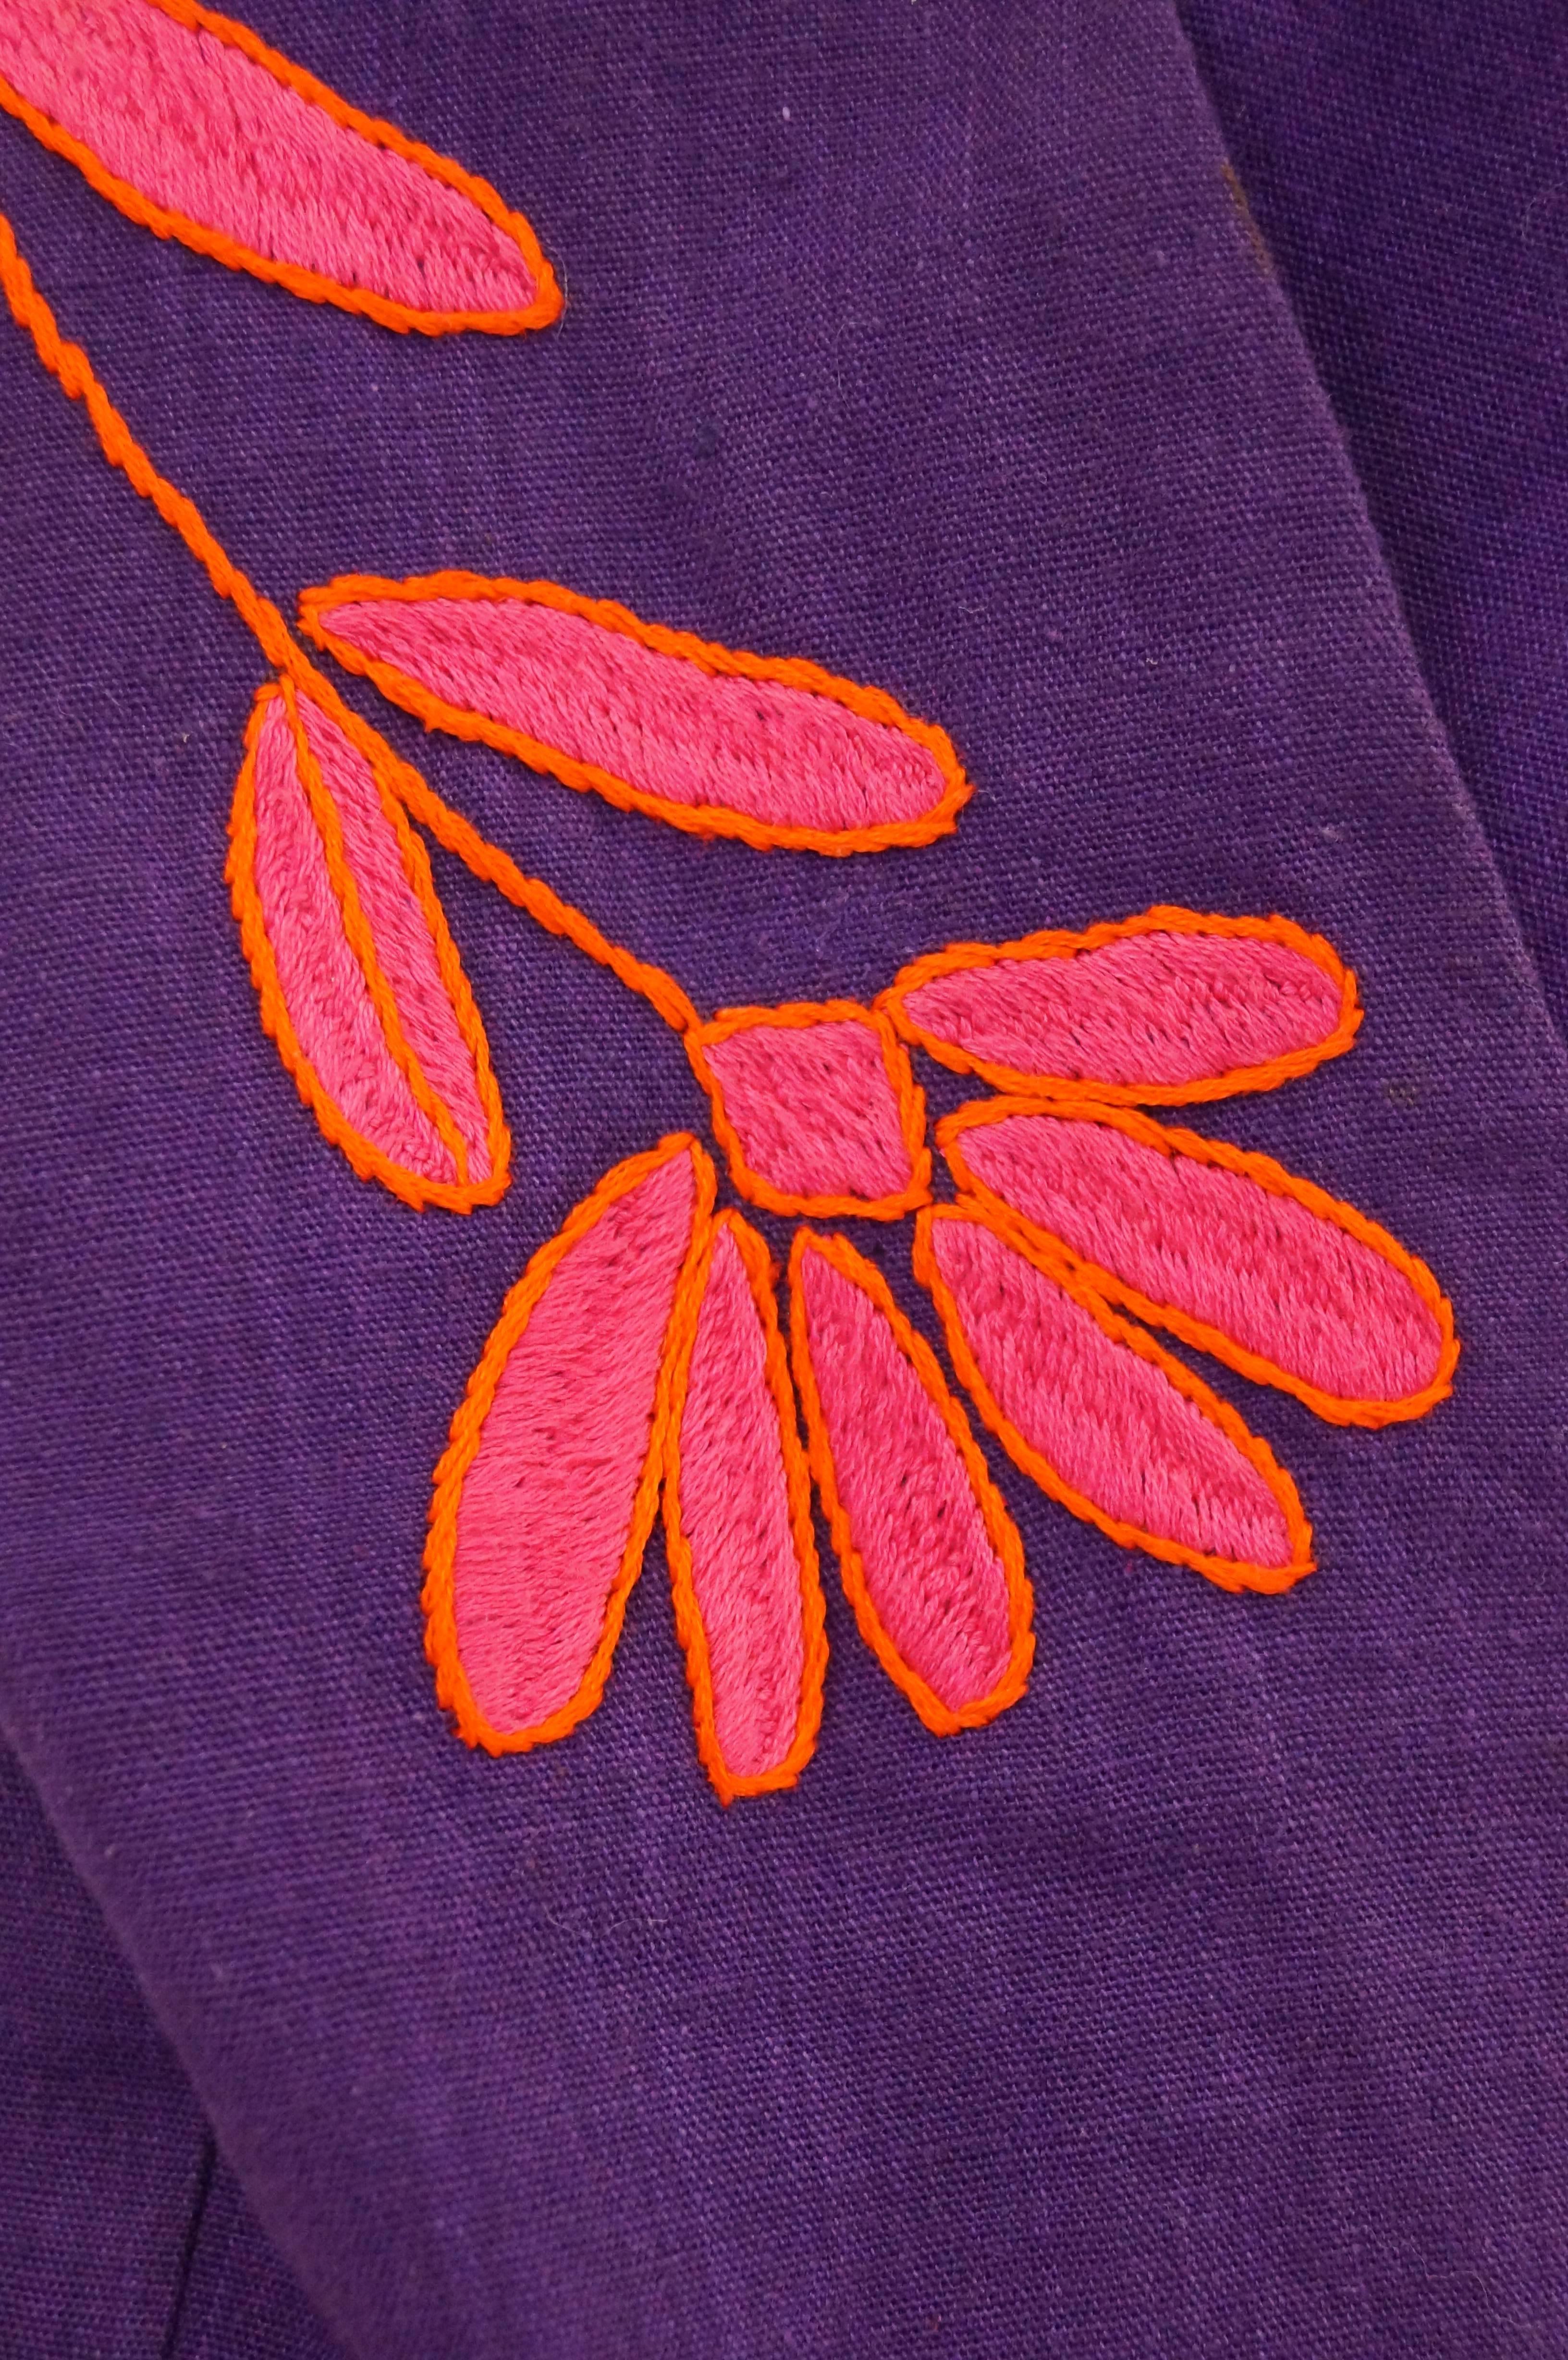 1960s Josefa Pink, Orange, and Purple Embroidered Mexican Shirt and Top In Excellent Condition For Sale In Houston, TX